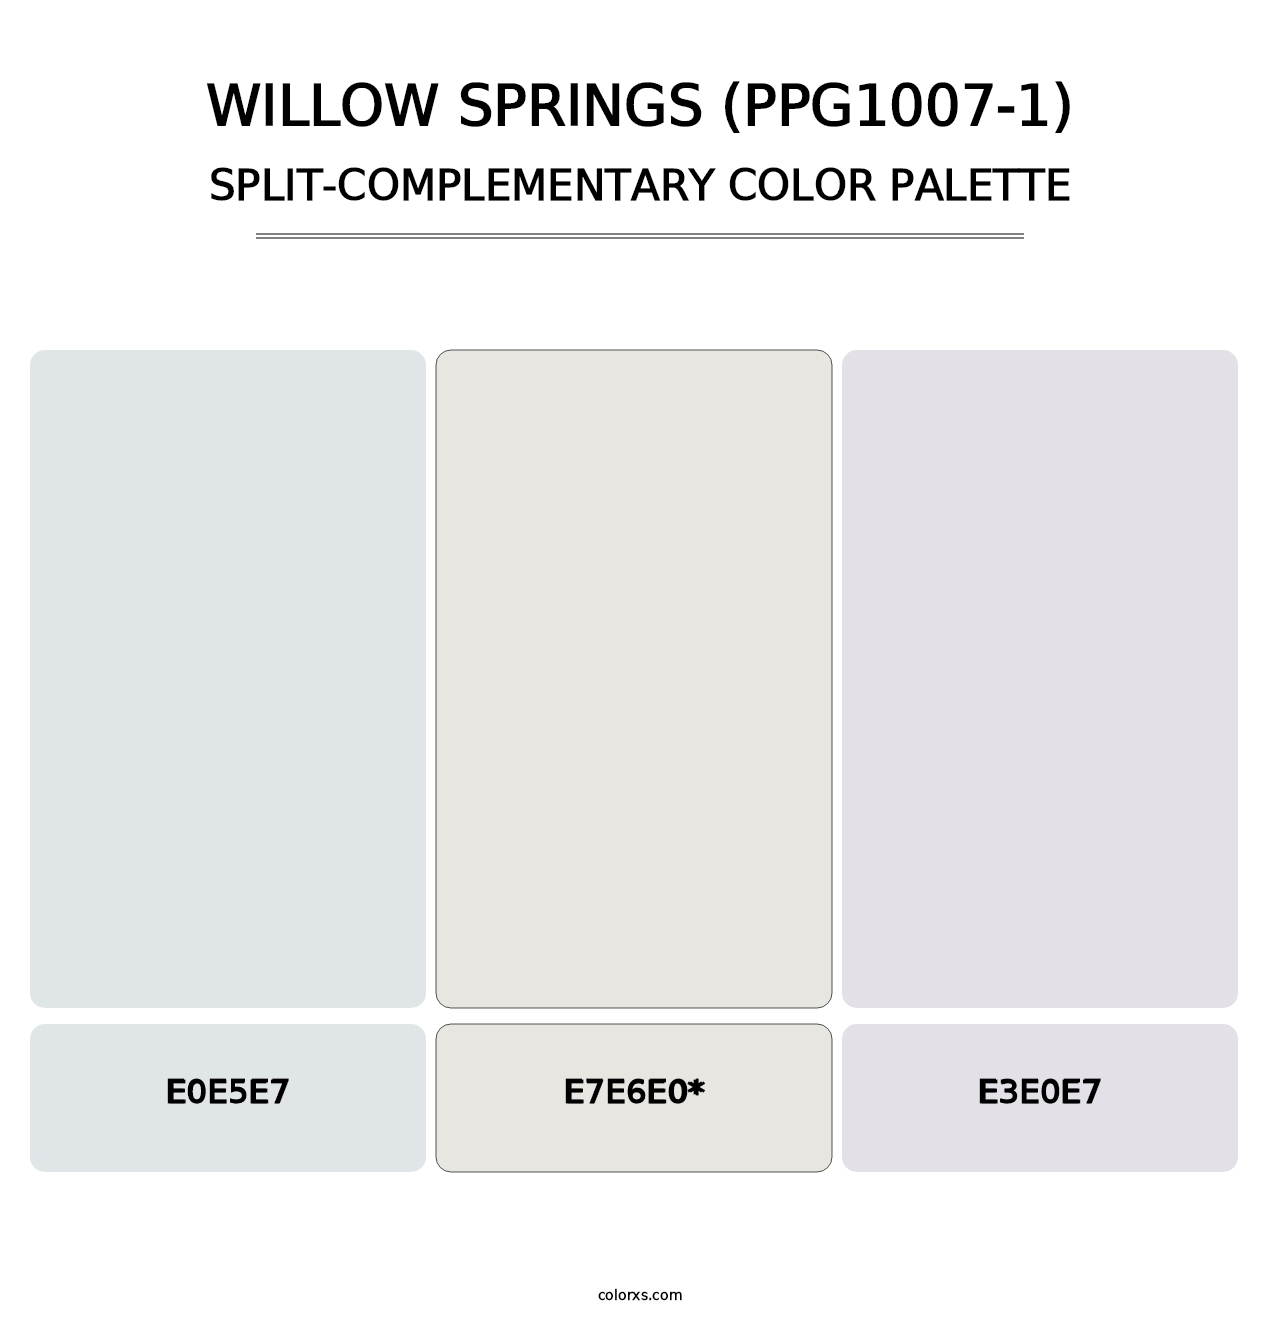 Willow Springs (PPG1007-1) - Split-Complementary Color Palette